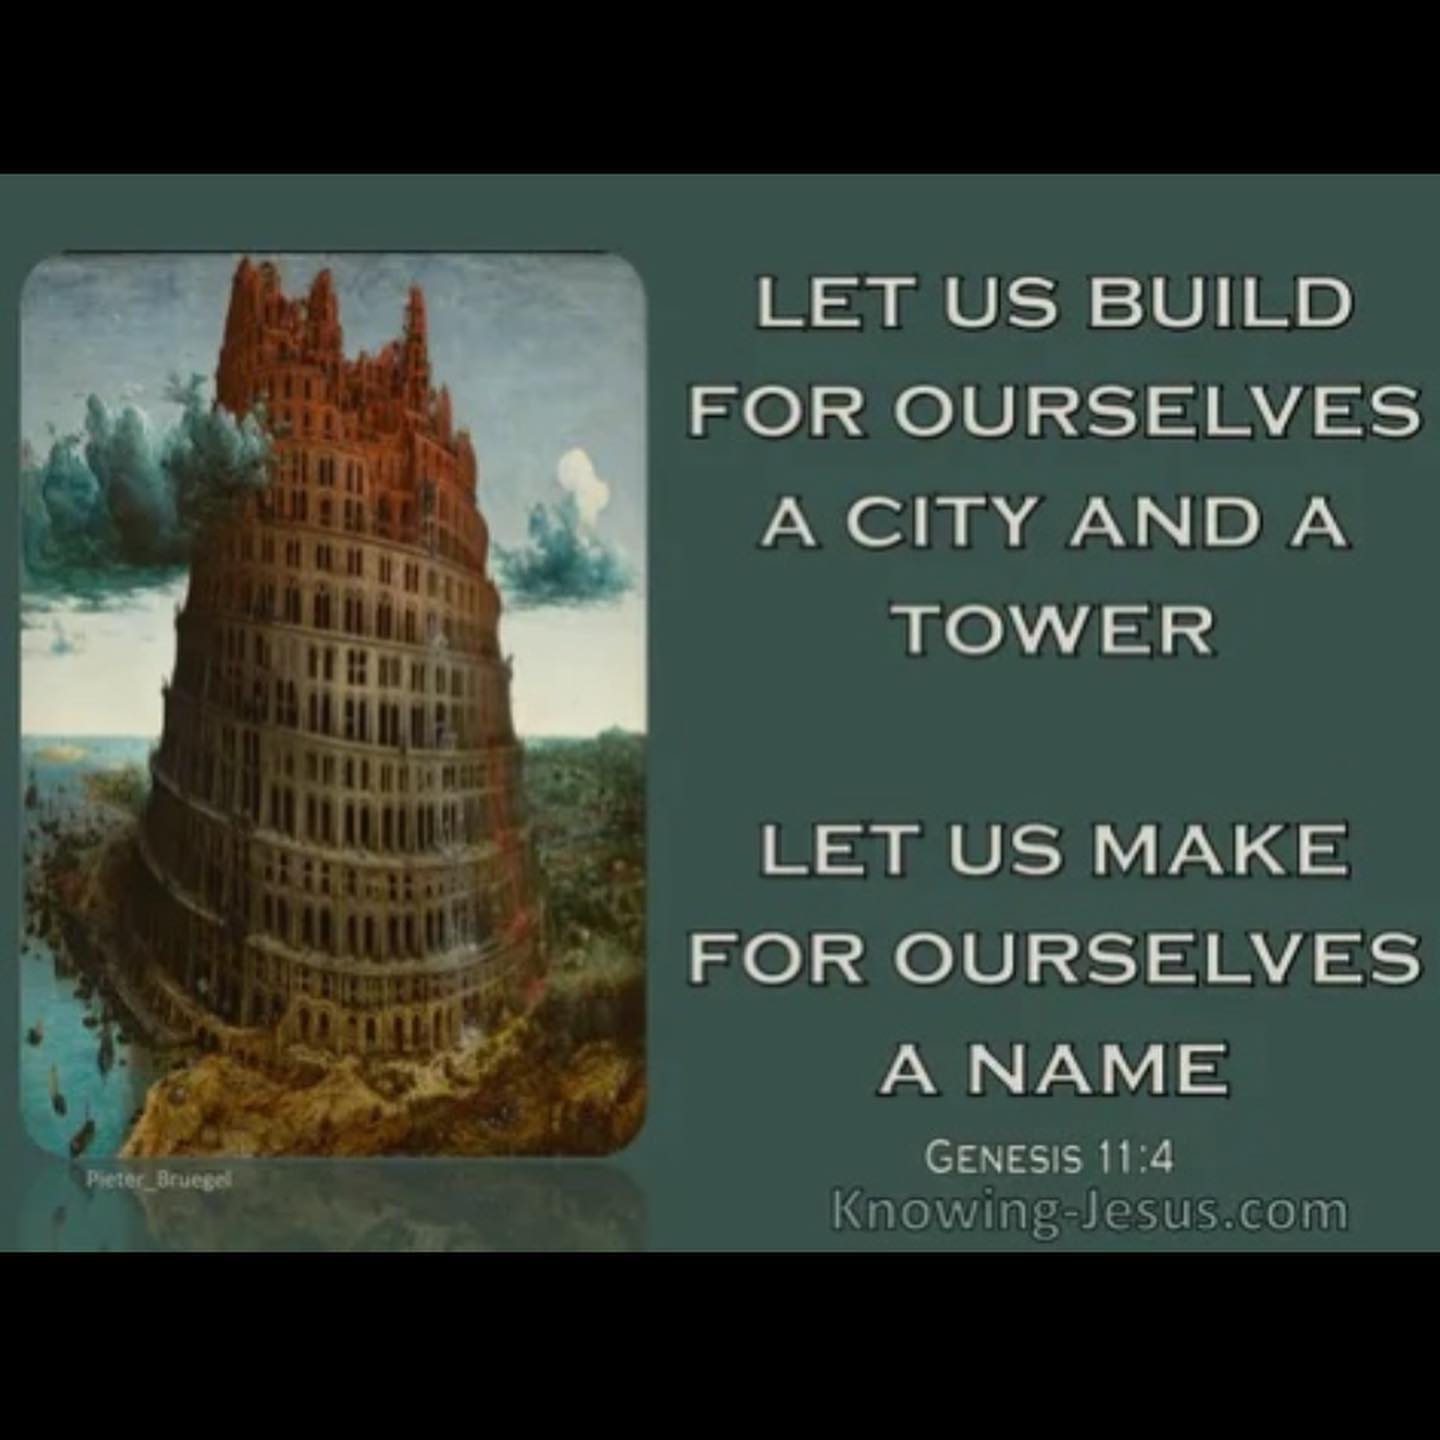 Noah’s descendants wanted to build a name for themselves so they built a city with a great tower. Not to worship God, but to make themselves famous for their architecture and oneness. Had they forgotten the flood? Had they forgotten how mighty and holy our God is? That He detests pride and sin? That He provides safety for the righteous? Obviously, they forgot. Join us Sunday 10AM @fallbrookvineyardchurch and find out what God did with these folks and why it’s incredibly relevant TODAY Dave and Steph Baxter will tag team Genesis 11 for the next two Sundays. Bring your bibles and chairs. #towerofbabel#nimrod#globalism#eschatology#everythingpointstojesus#godmyrefuge#truth#godsprovision#godsgrace#godscovering#godslove#godsjudgement#wordofgod#thewaythetruththelife#worship#prayer #repentance#praise#praisethelord#revival#lifeabundant#community #support #love#familyofgod #outdoorchurch #organicchurch #outlawchurch #dogfriendlychurch